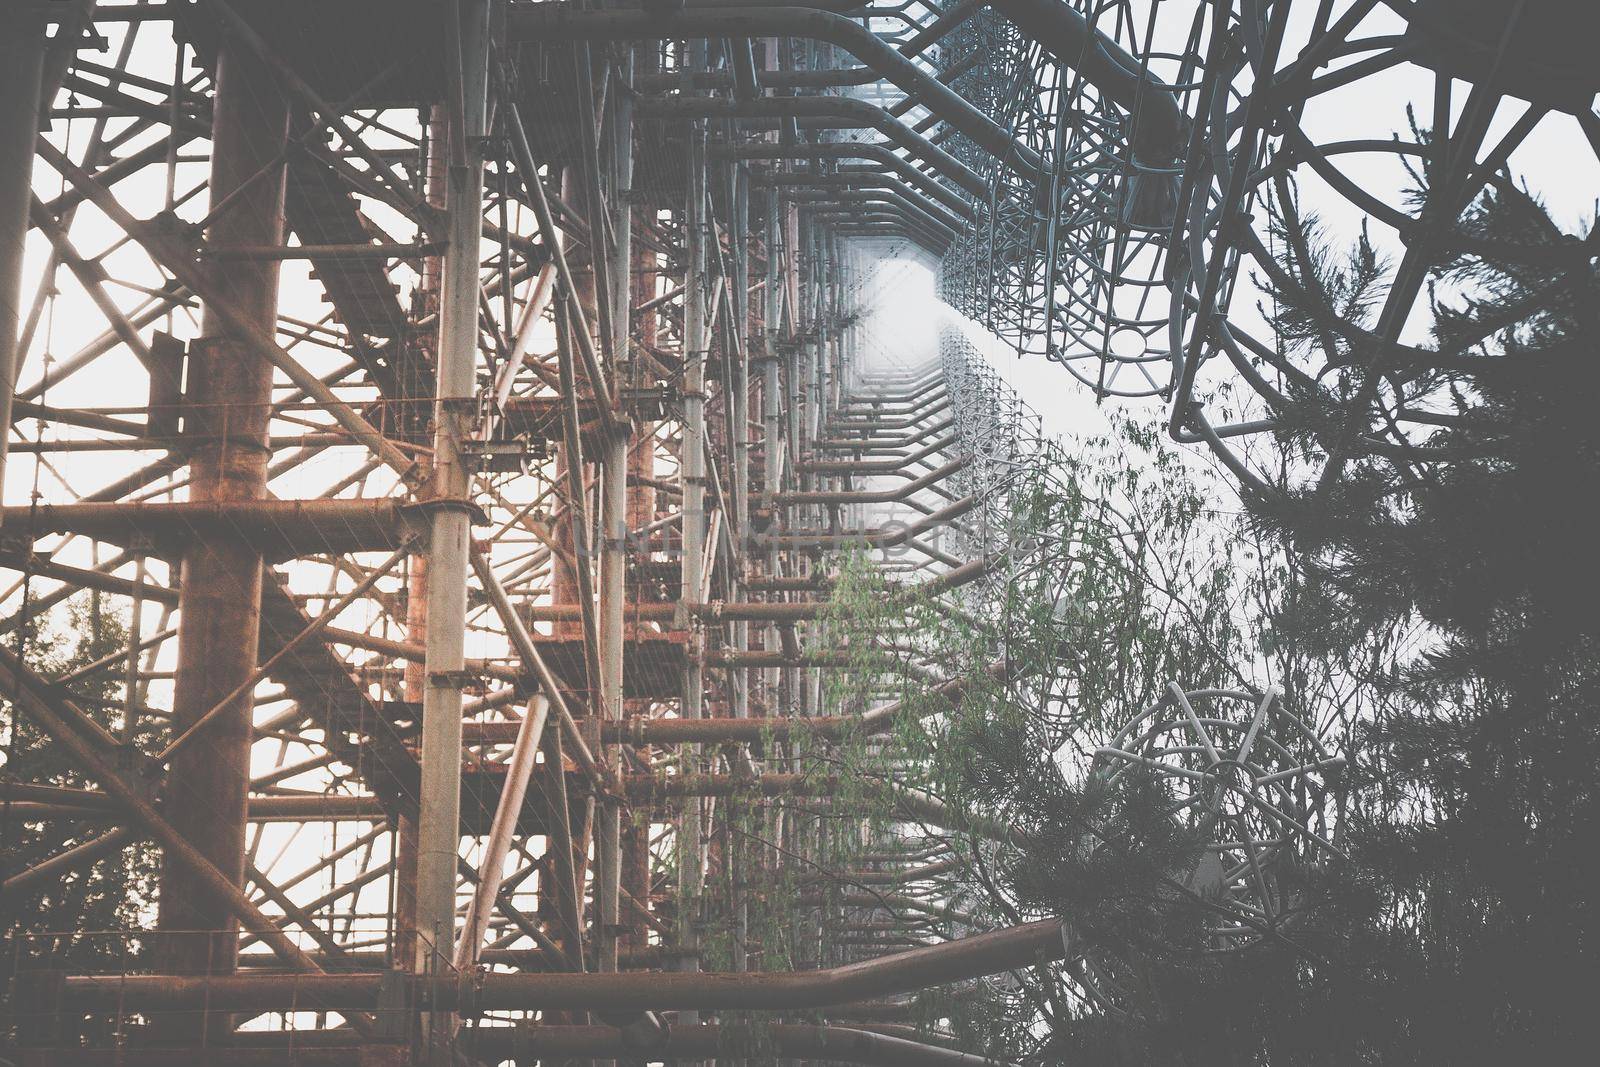 Soviet over-the-horizon radar station Duga in the Chernobyl exclusion zone